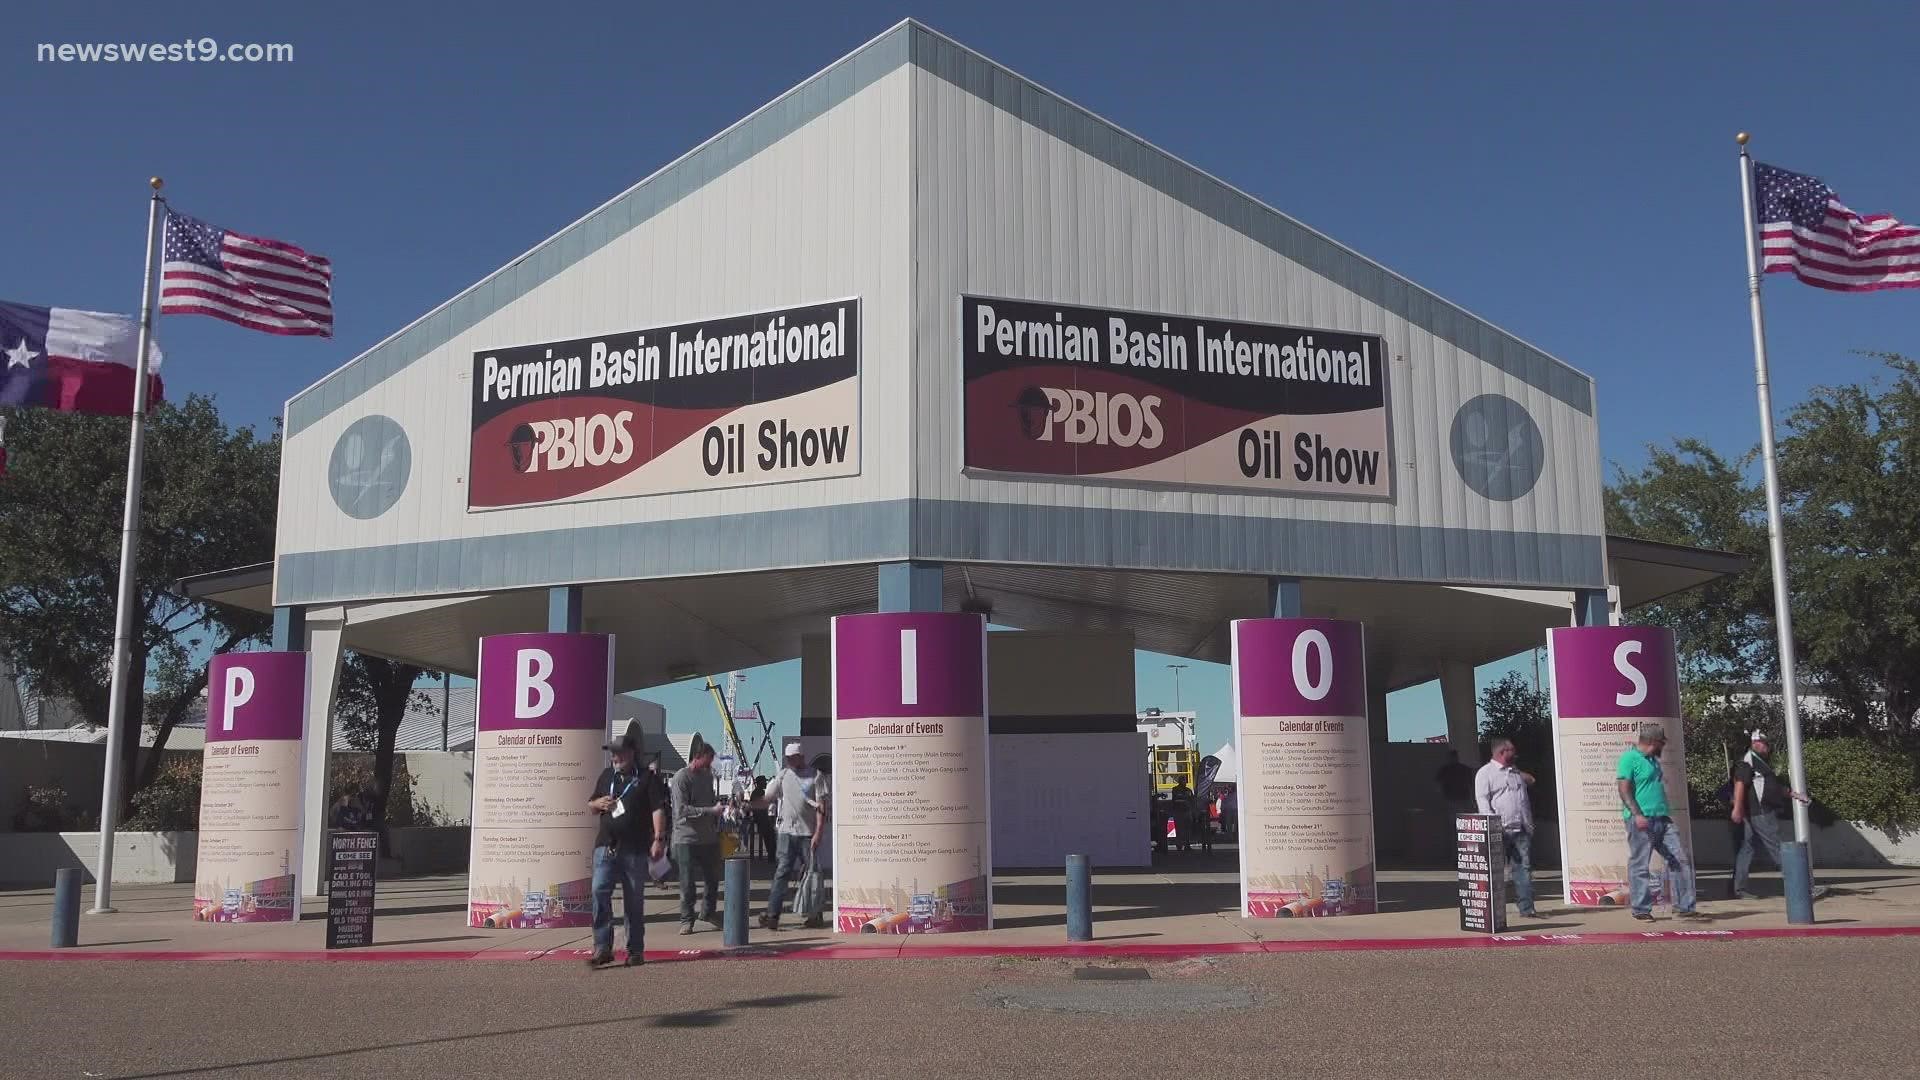 With more people attending the Permian Basin International Oil Show, the hope is that Odessa brings in around $24 million at least.